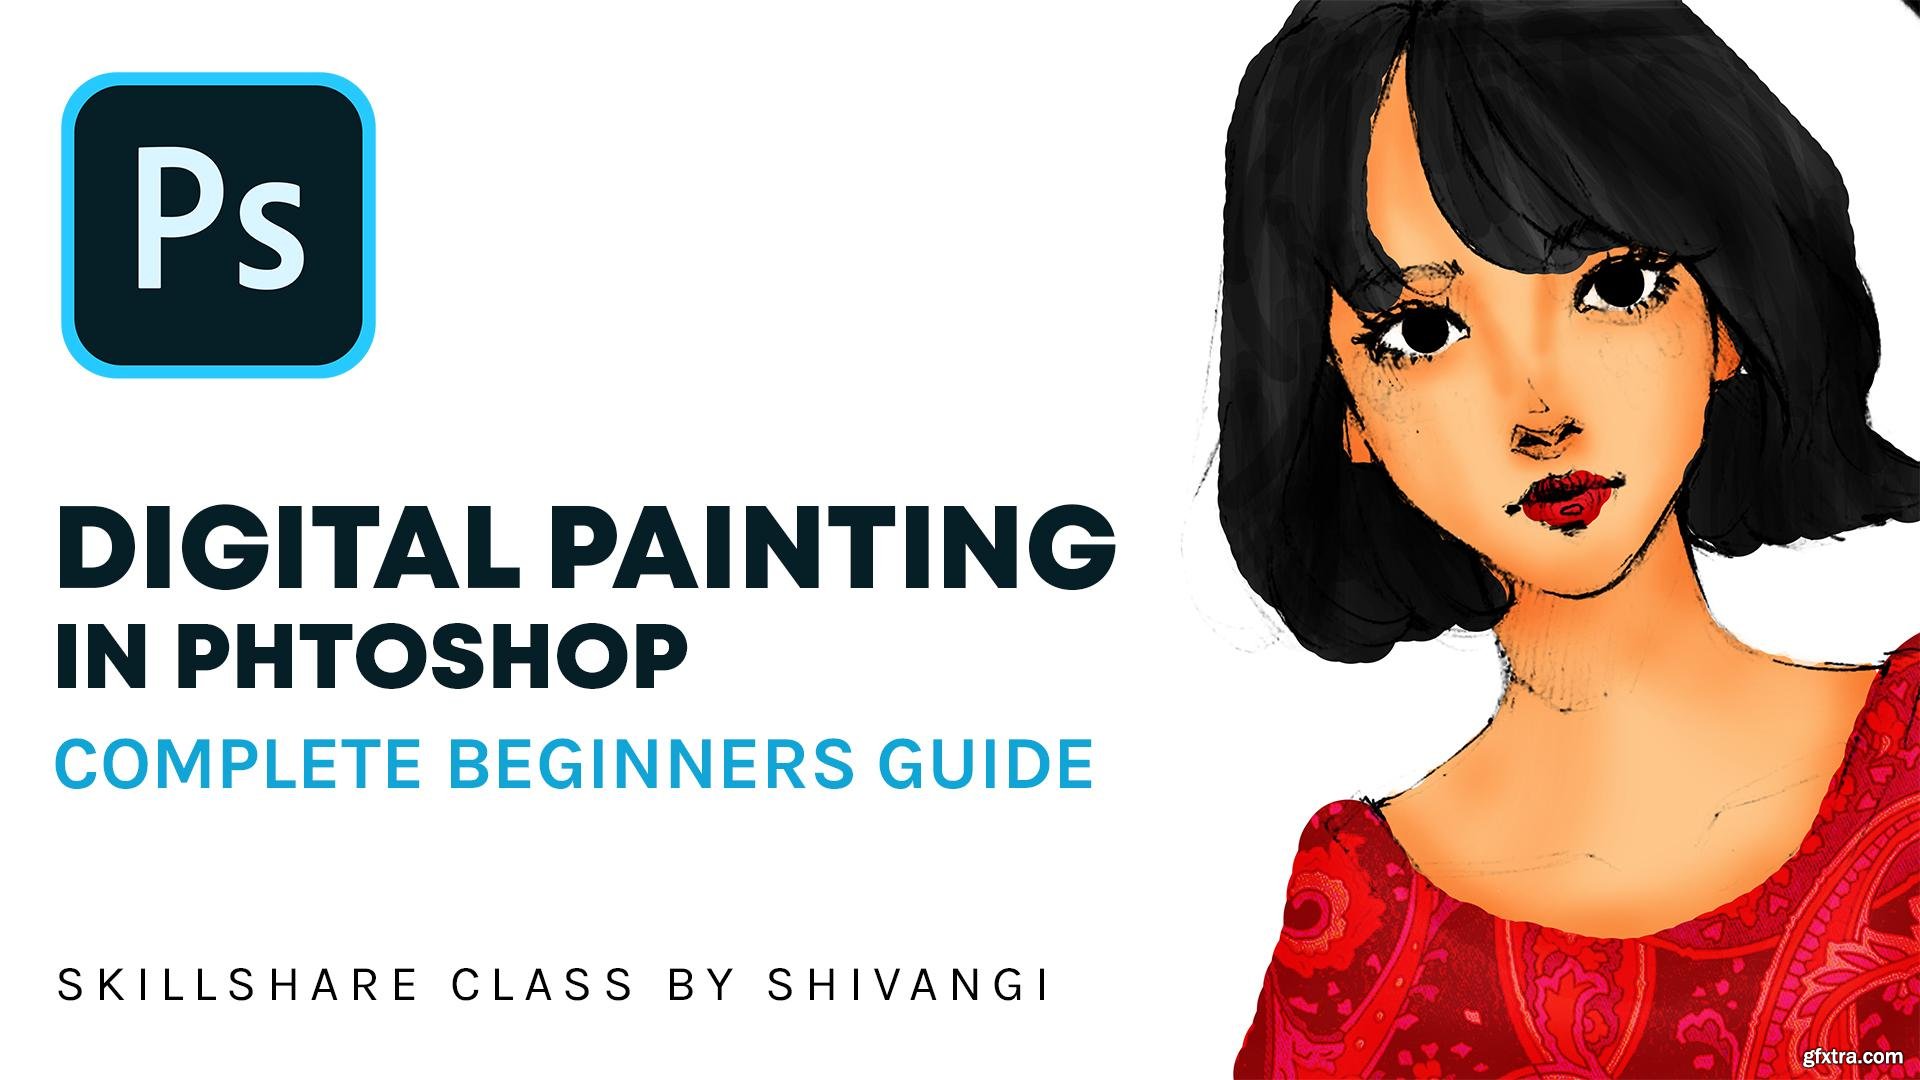 digital painting in photoshop pdf free download